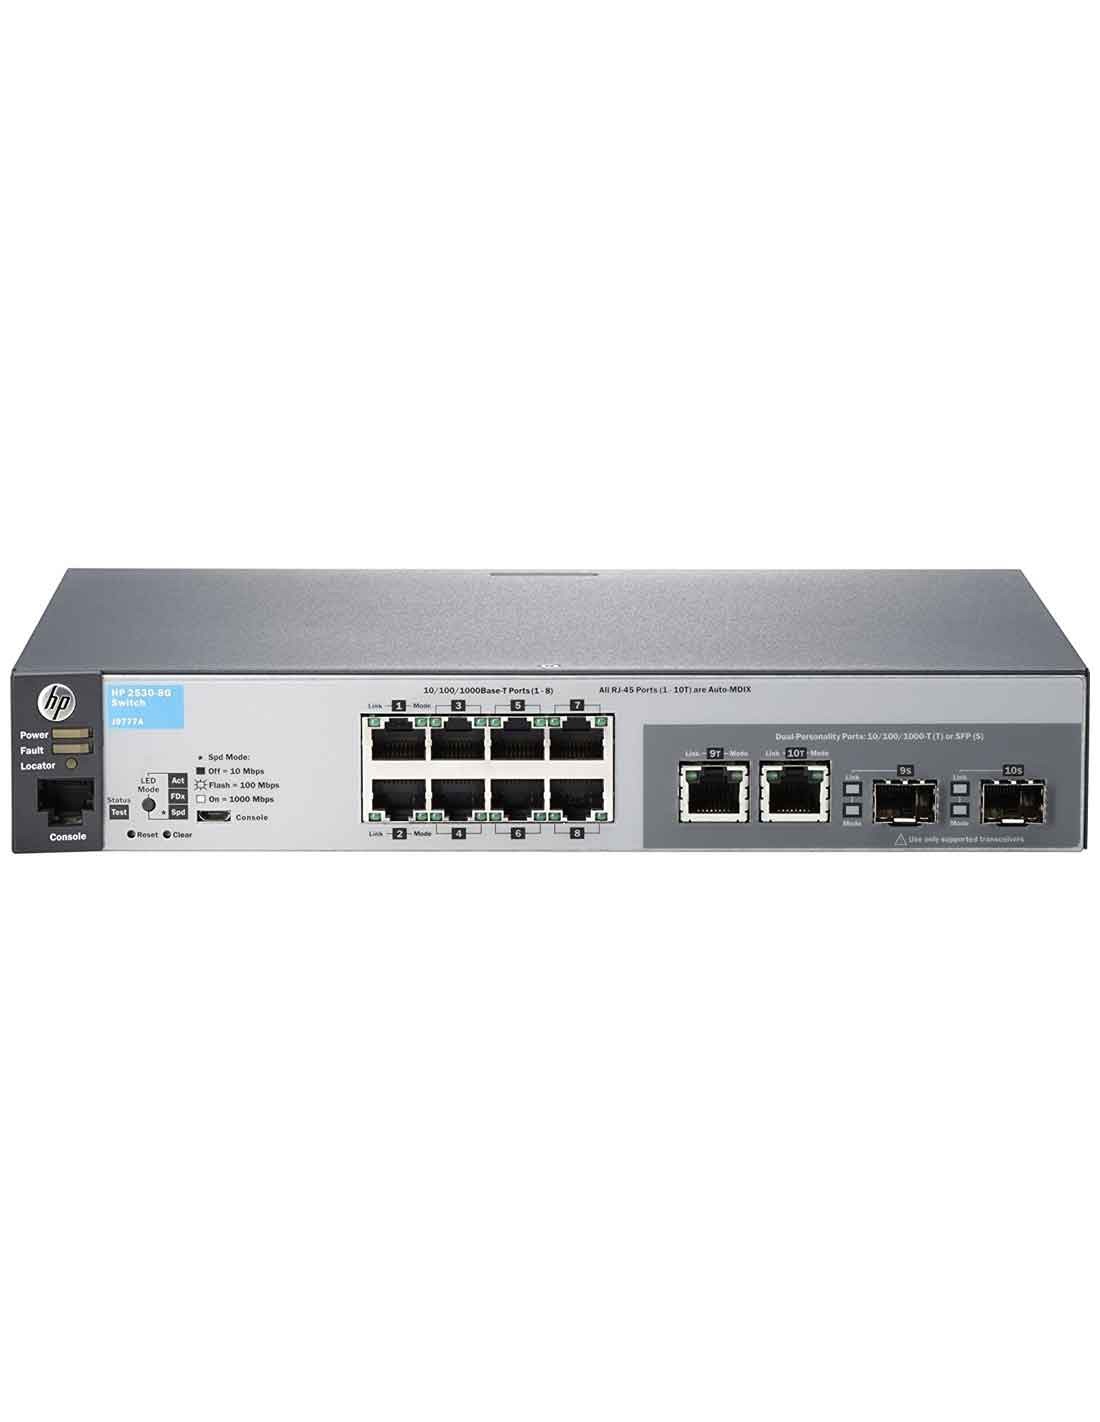 Aruba 2530 8G Switch (J9777A) at a cheap price and free delivery in Dubai